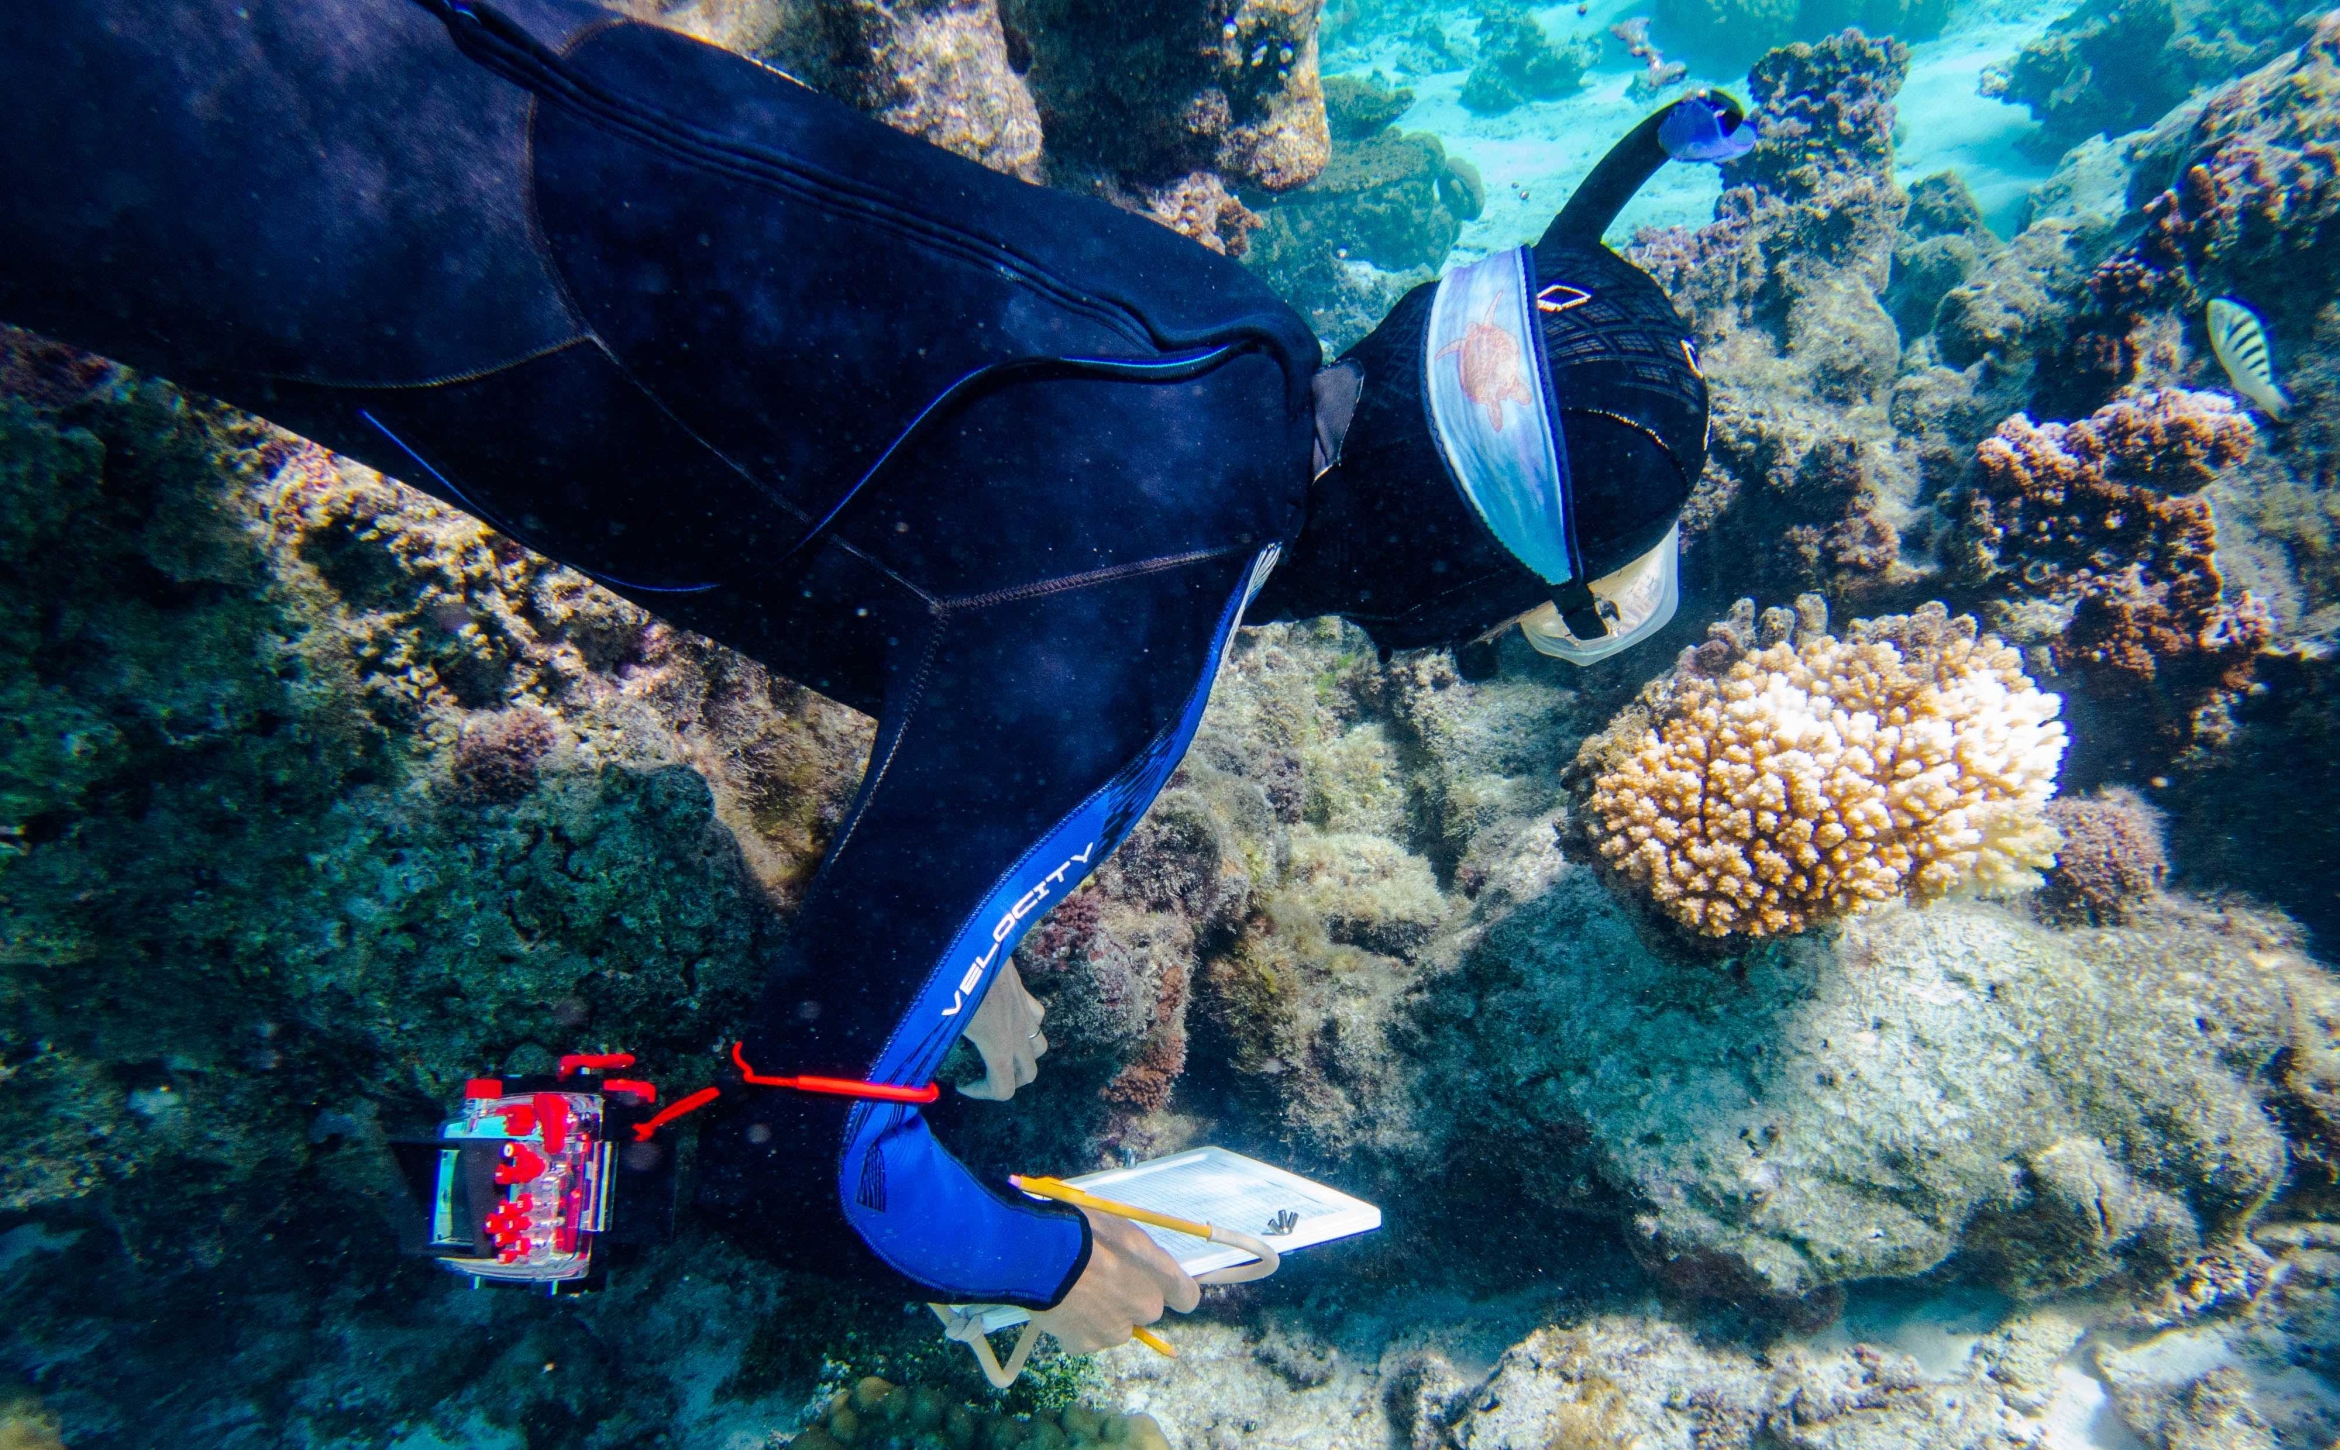 A snorkeler with camera and note pad investigates a nearly bleached coral.